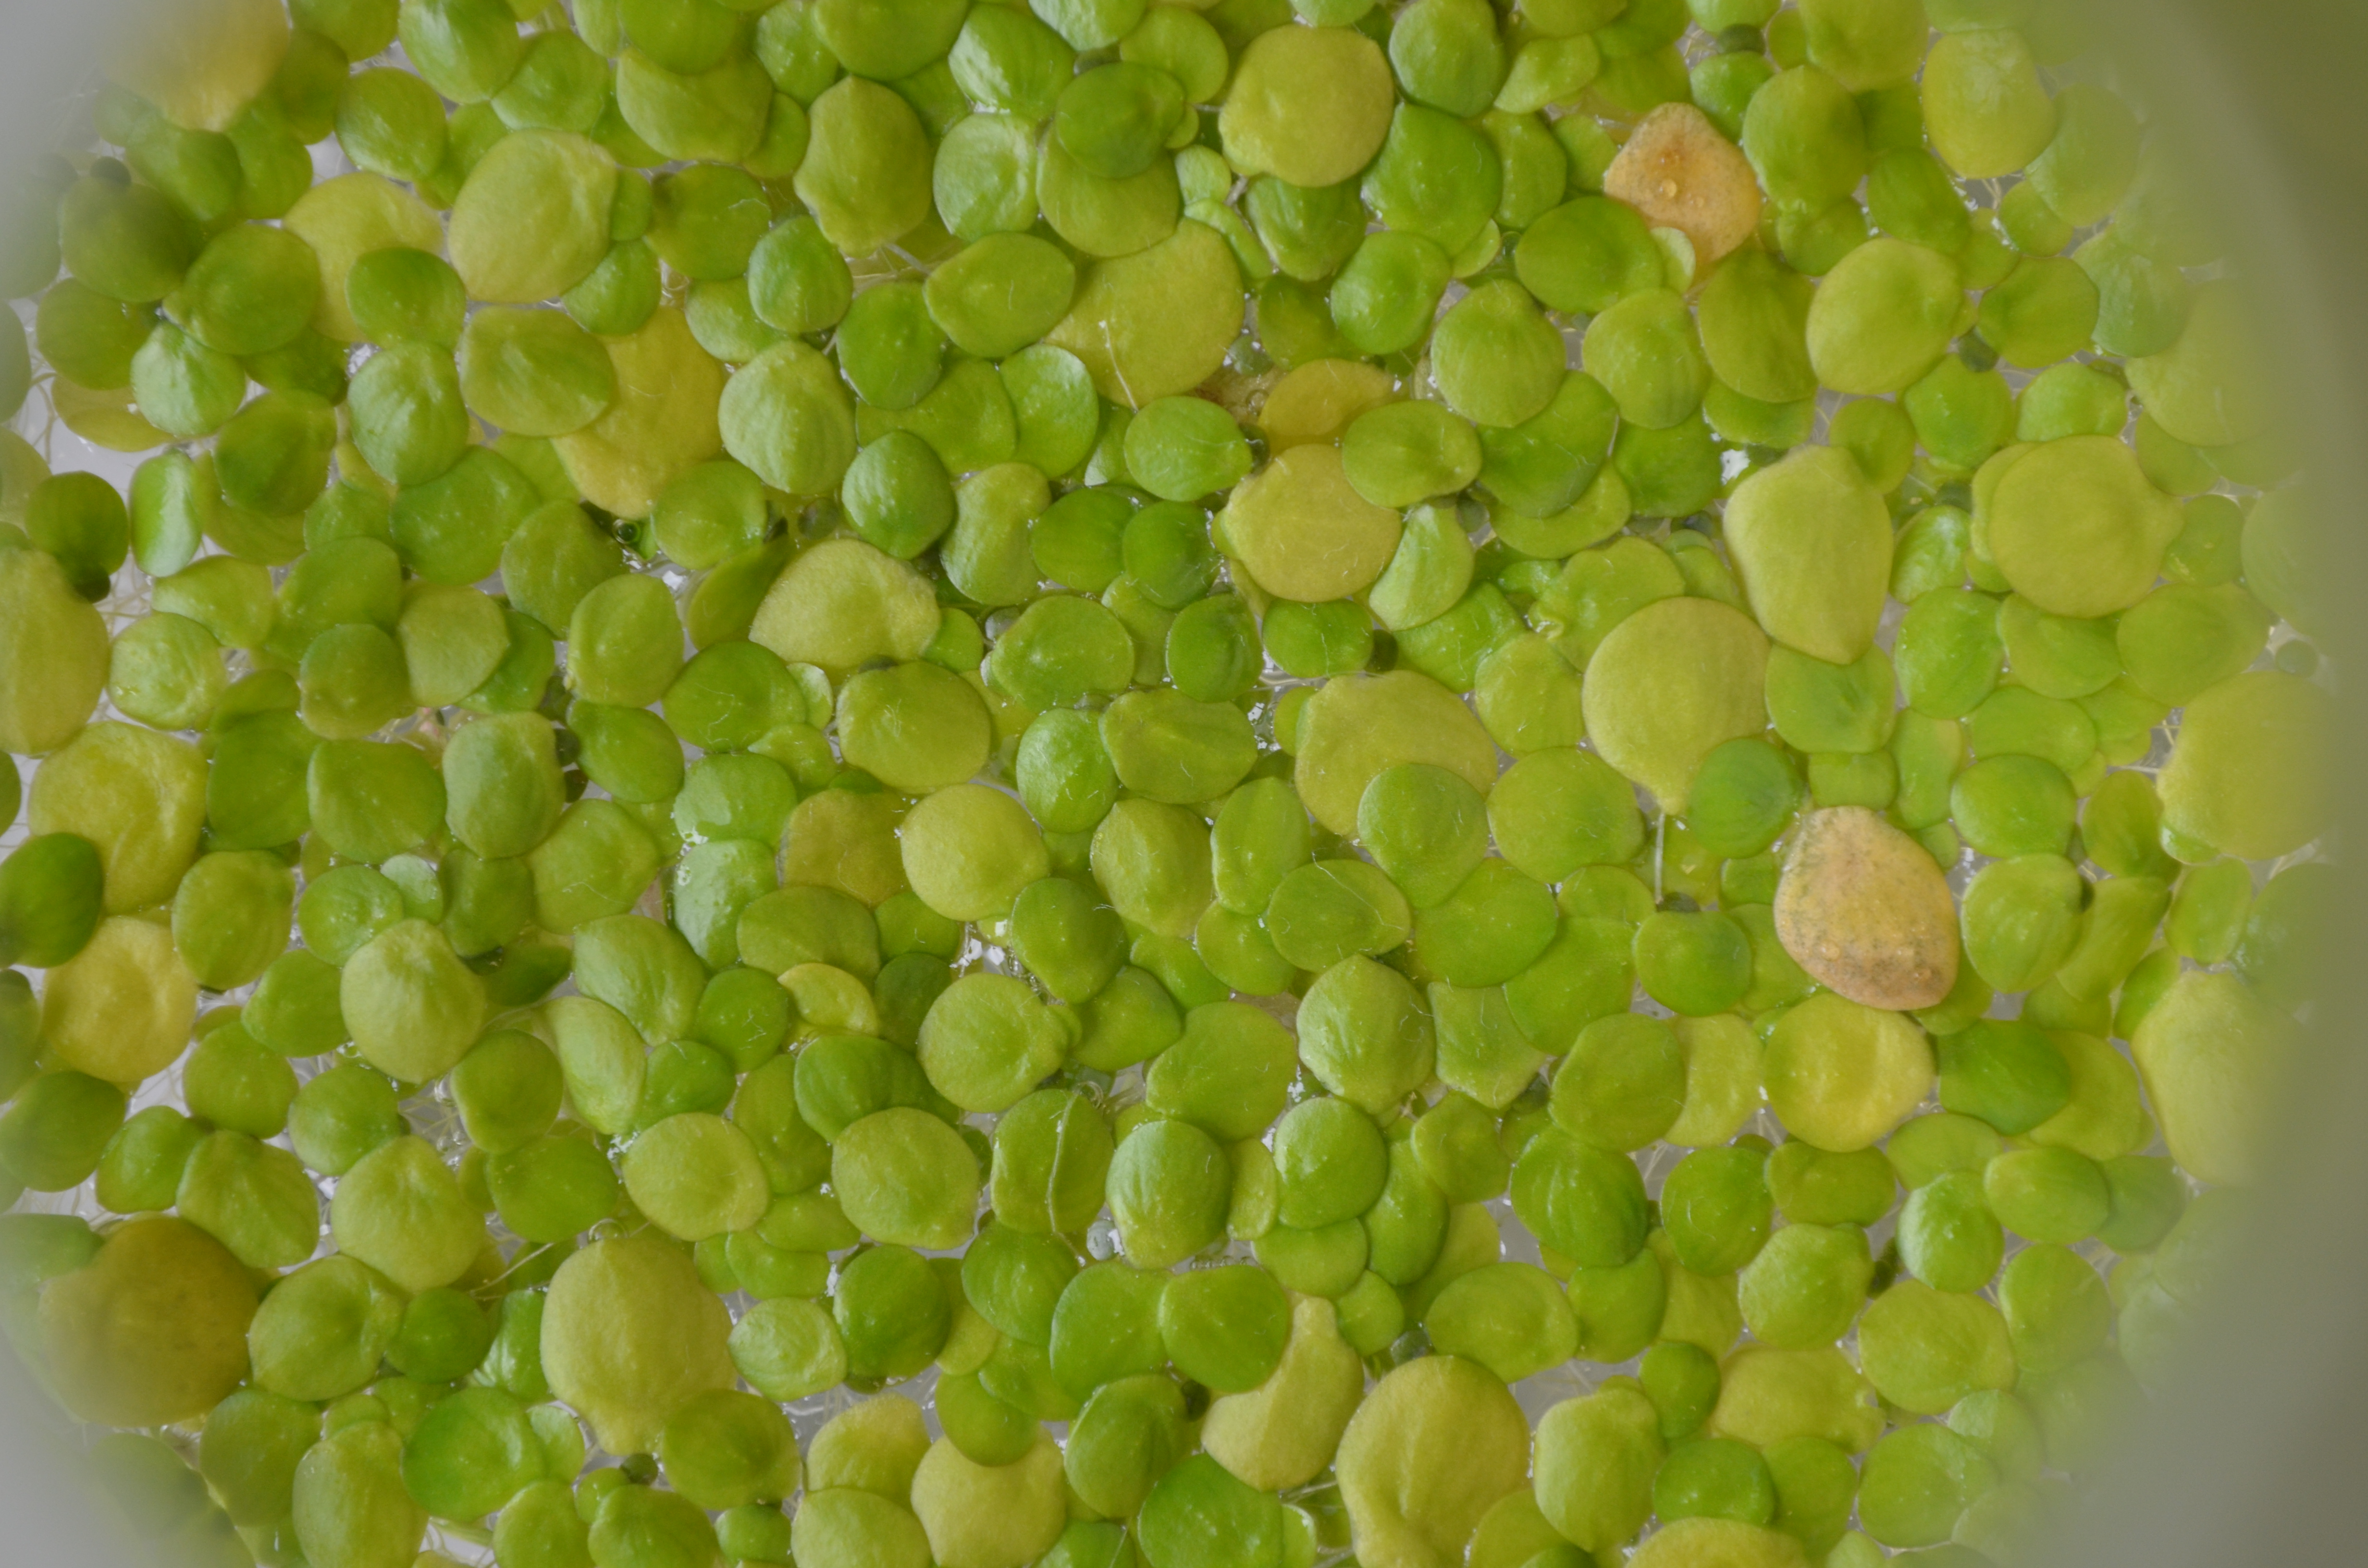 Close up shot of duckweeds growing. Lots of greens, yellows and orange colours.